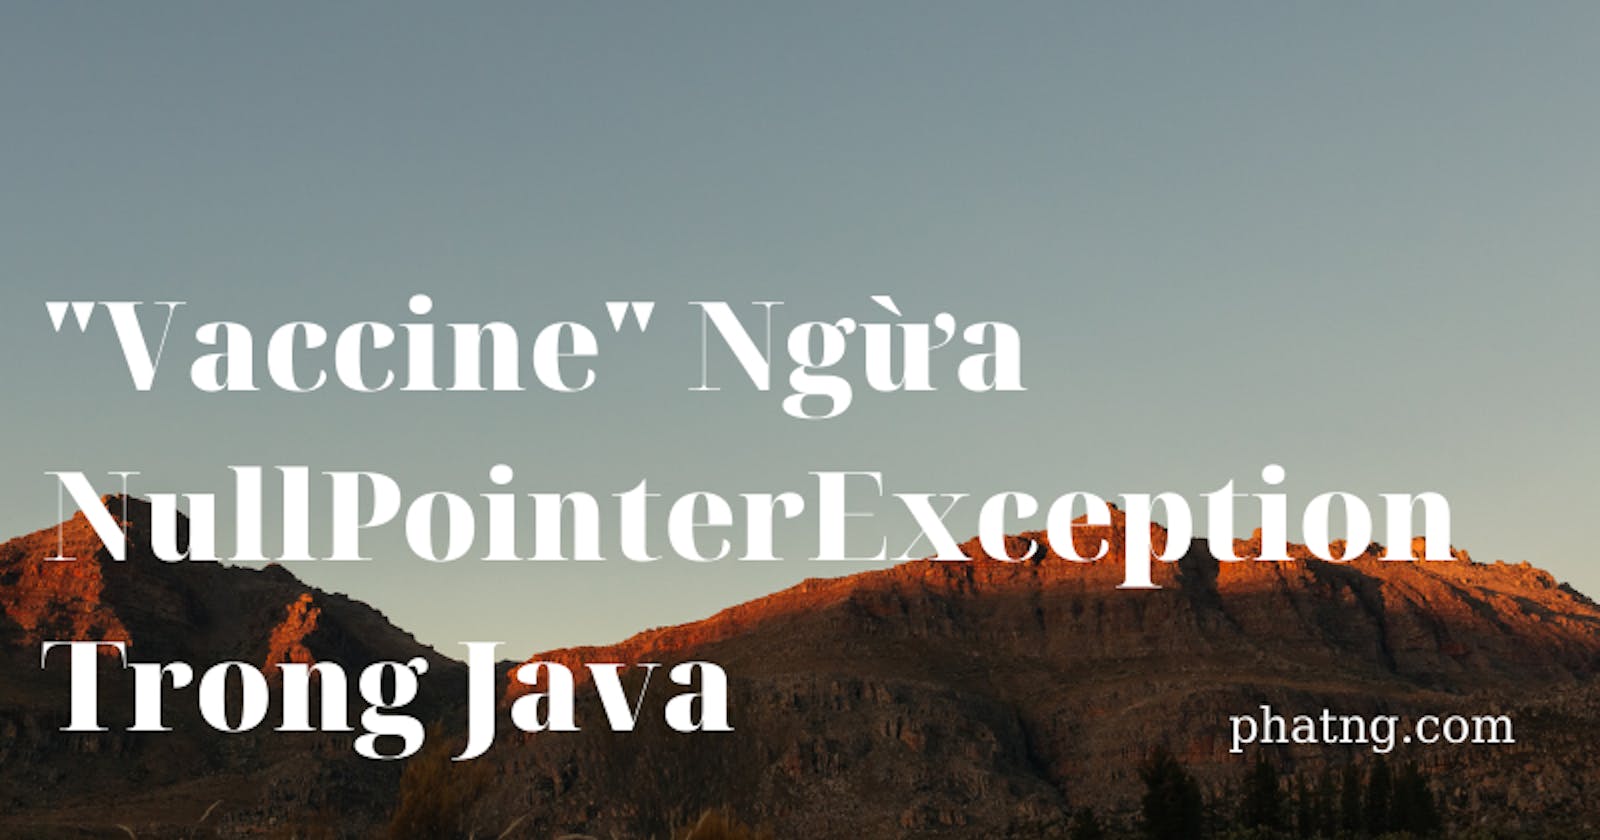 "Vaccine" ngừa NullPointerException trong Java